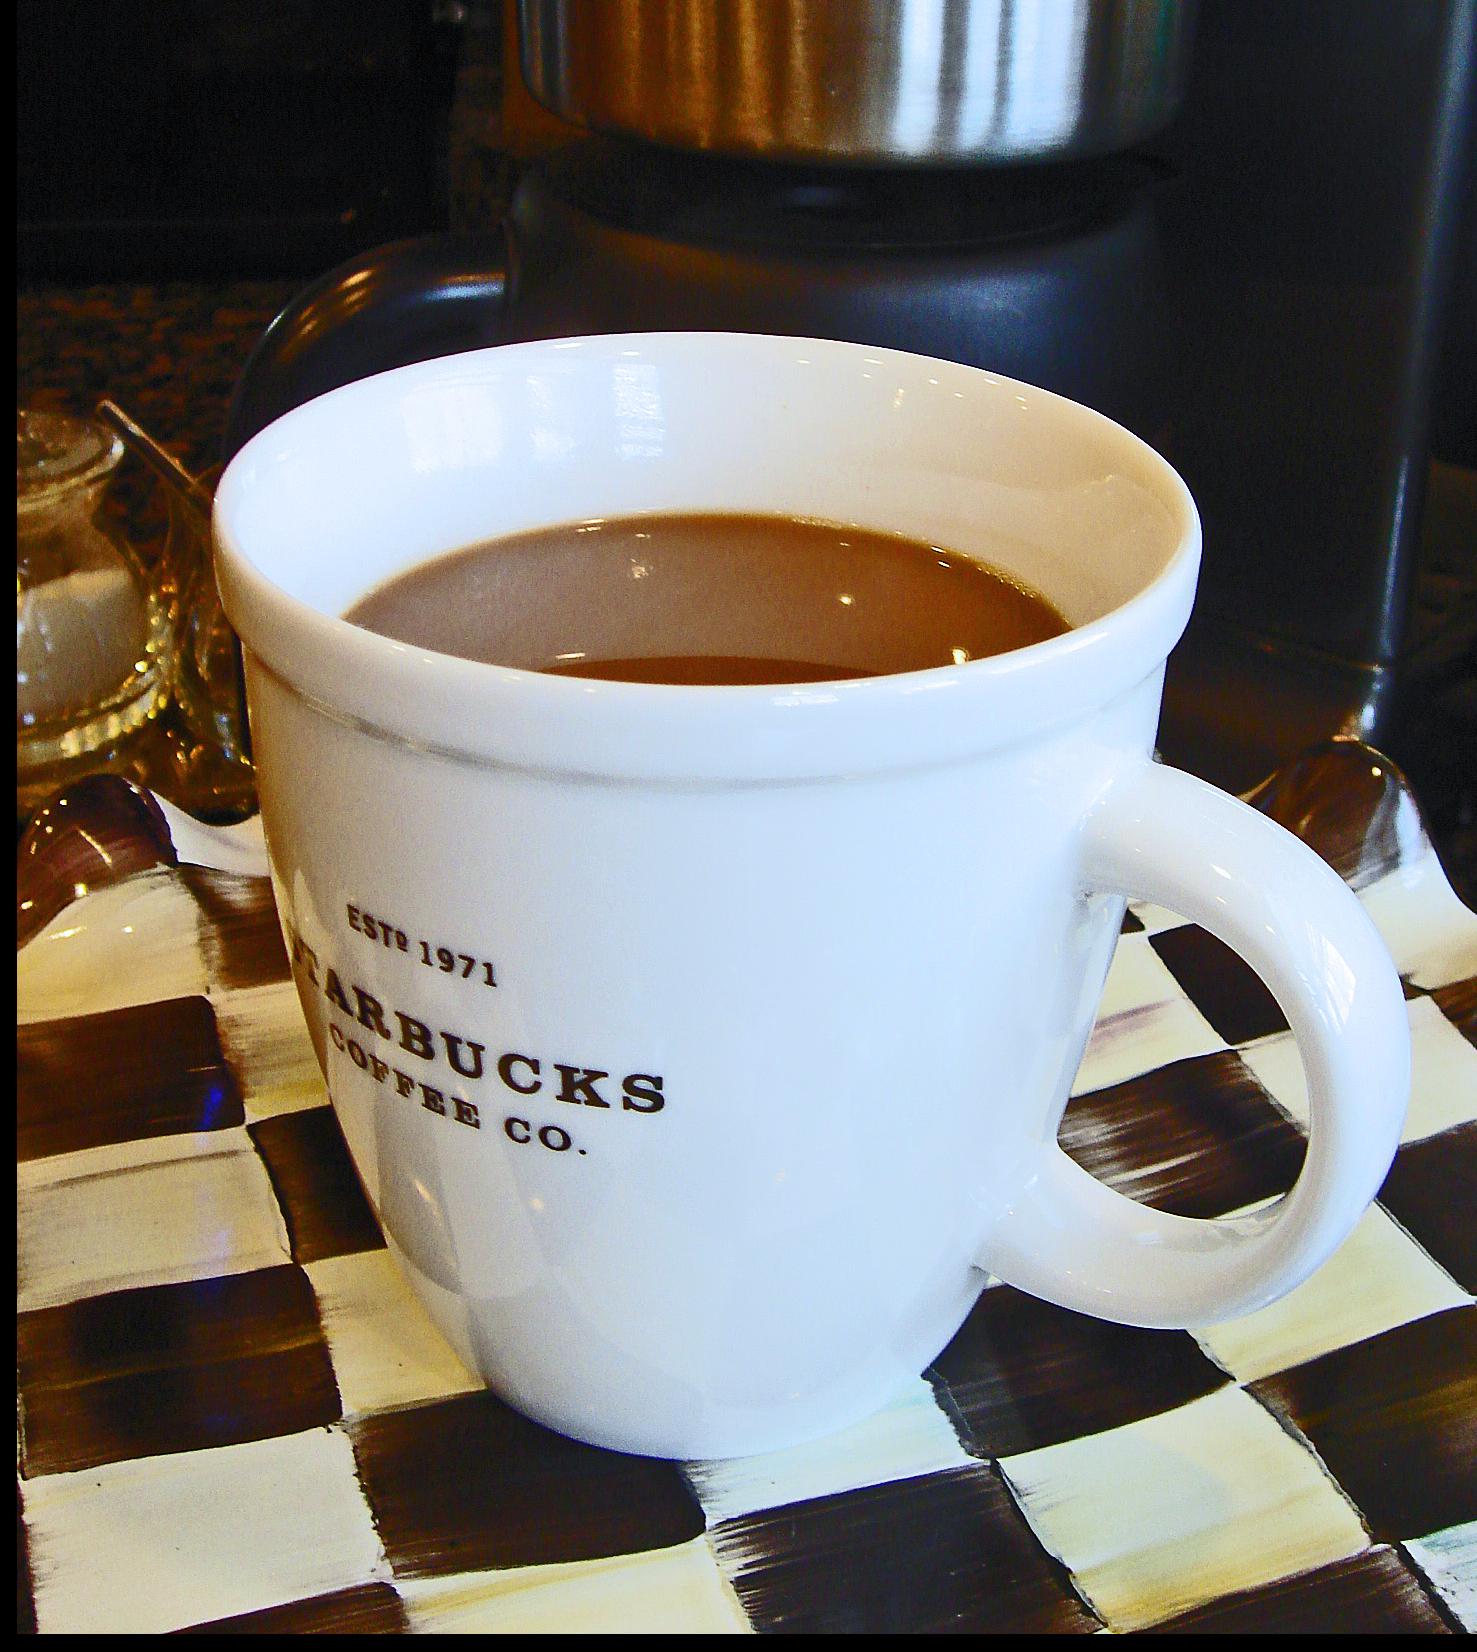  Indulge in a cup of Mocha Spiced Coffee to awaken your senses.